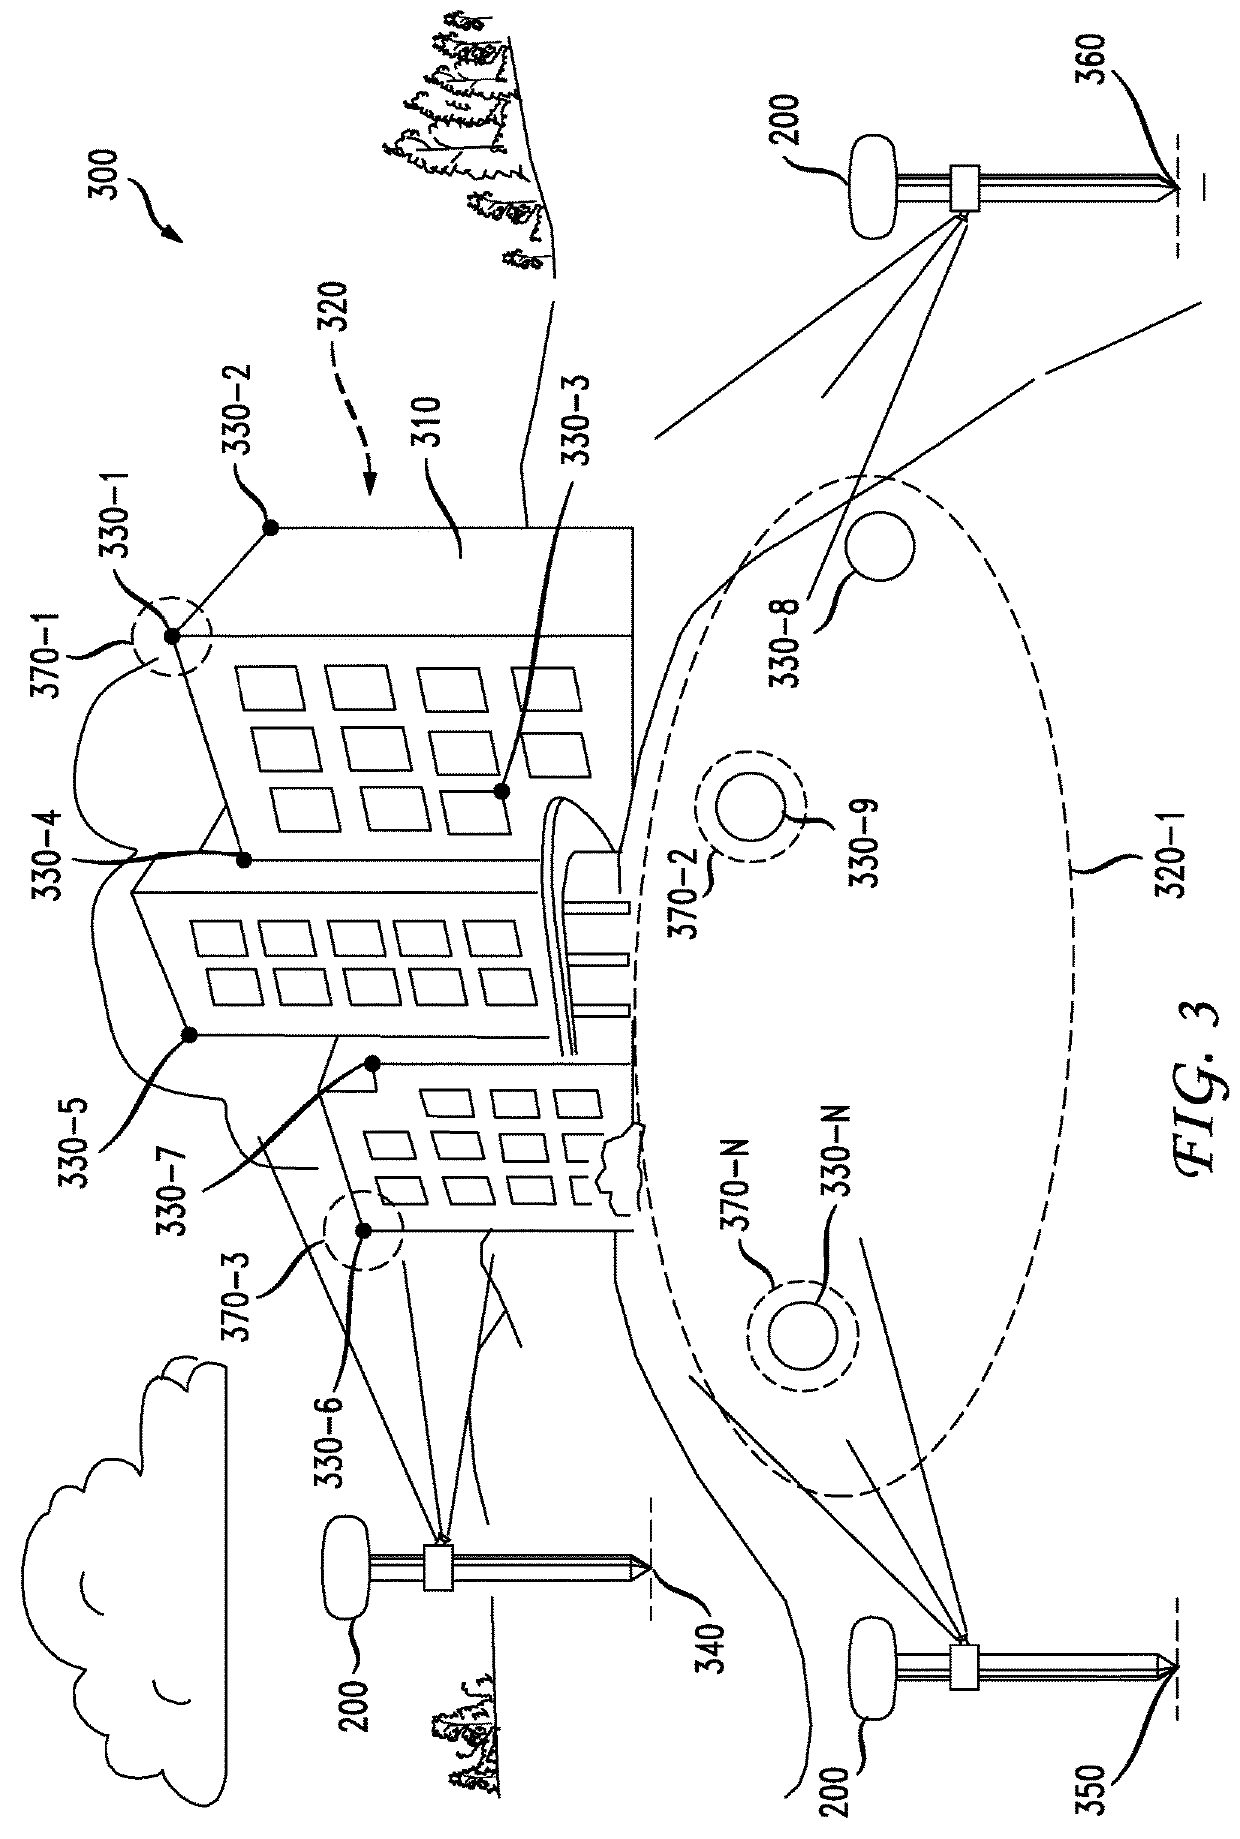 Enhanced remote surveying systems and methods